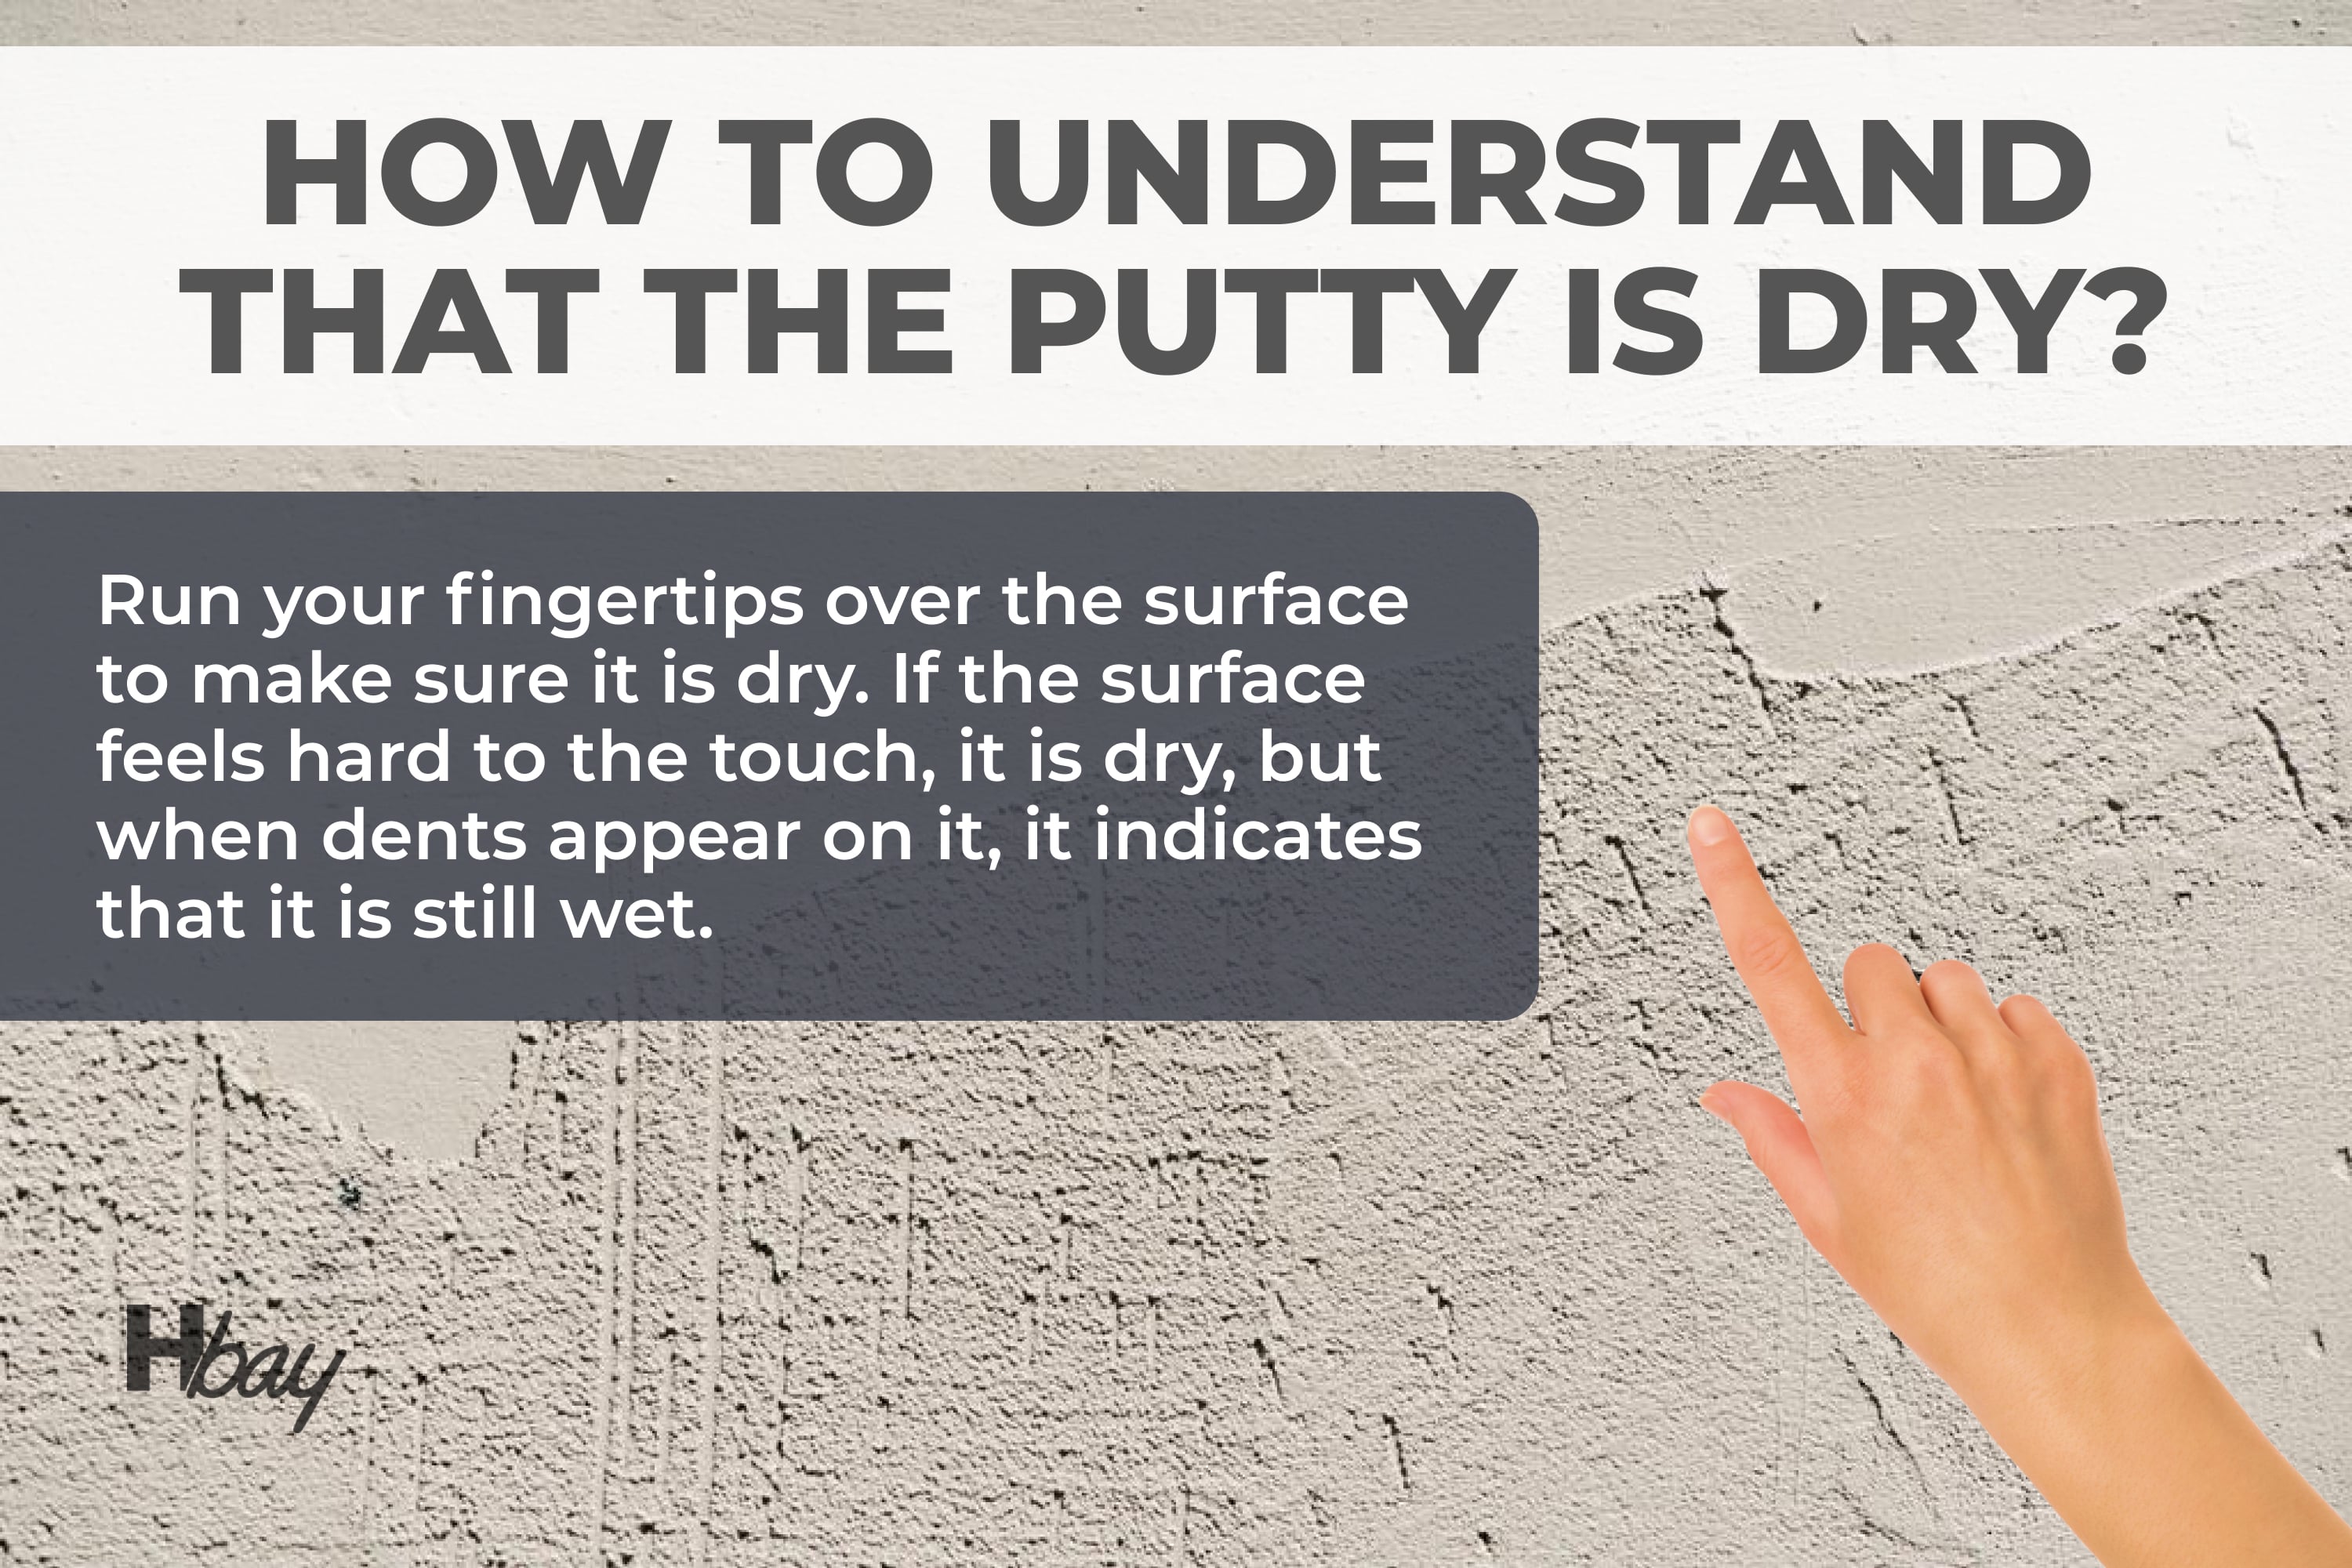 How to understand that the putty is dry